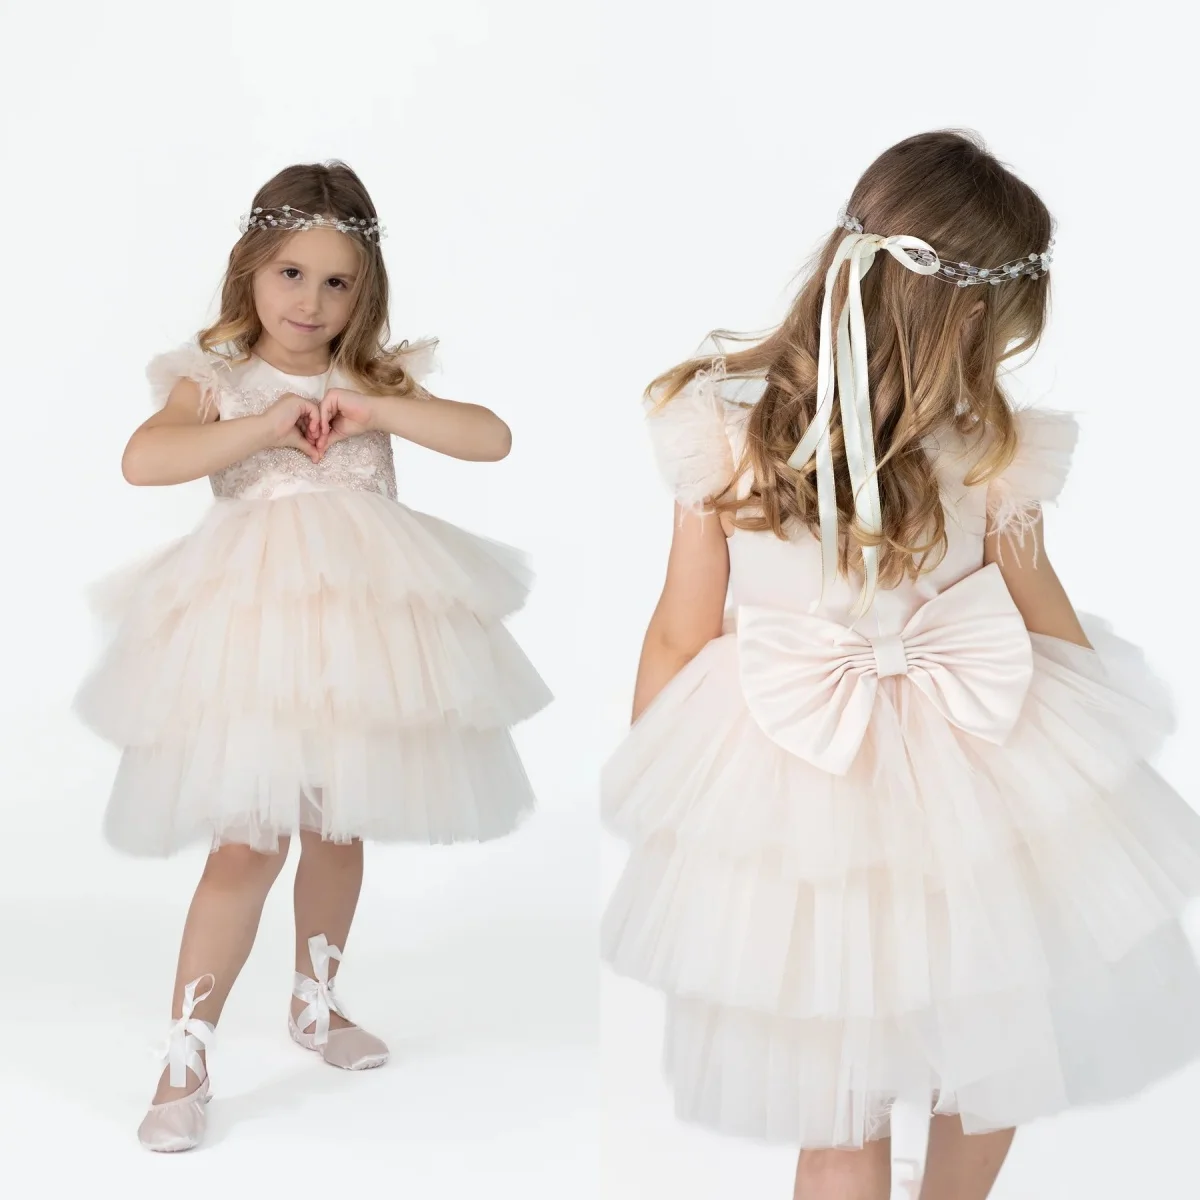 

Flower Girl Dress For Wedding Light Champagne Puffy Tiered Sleeveless Feathers With Bow Kids Birthday First Communion Ball Gown